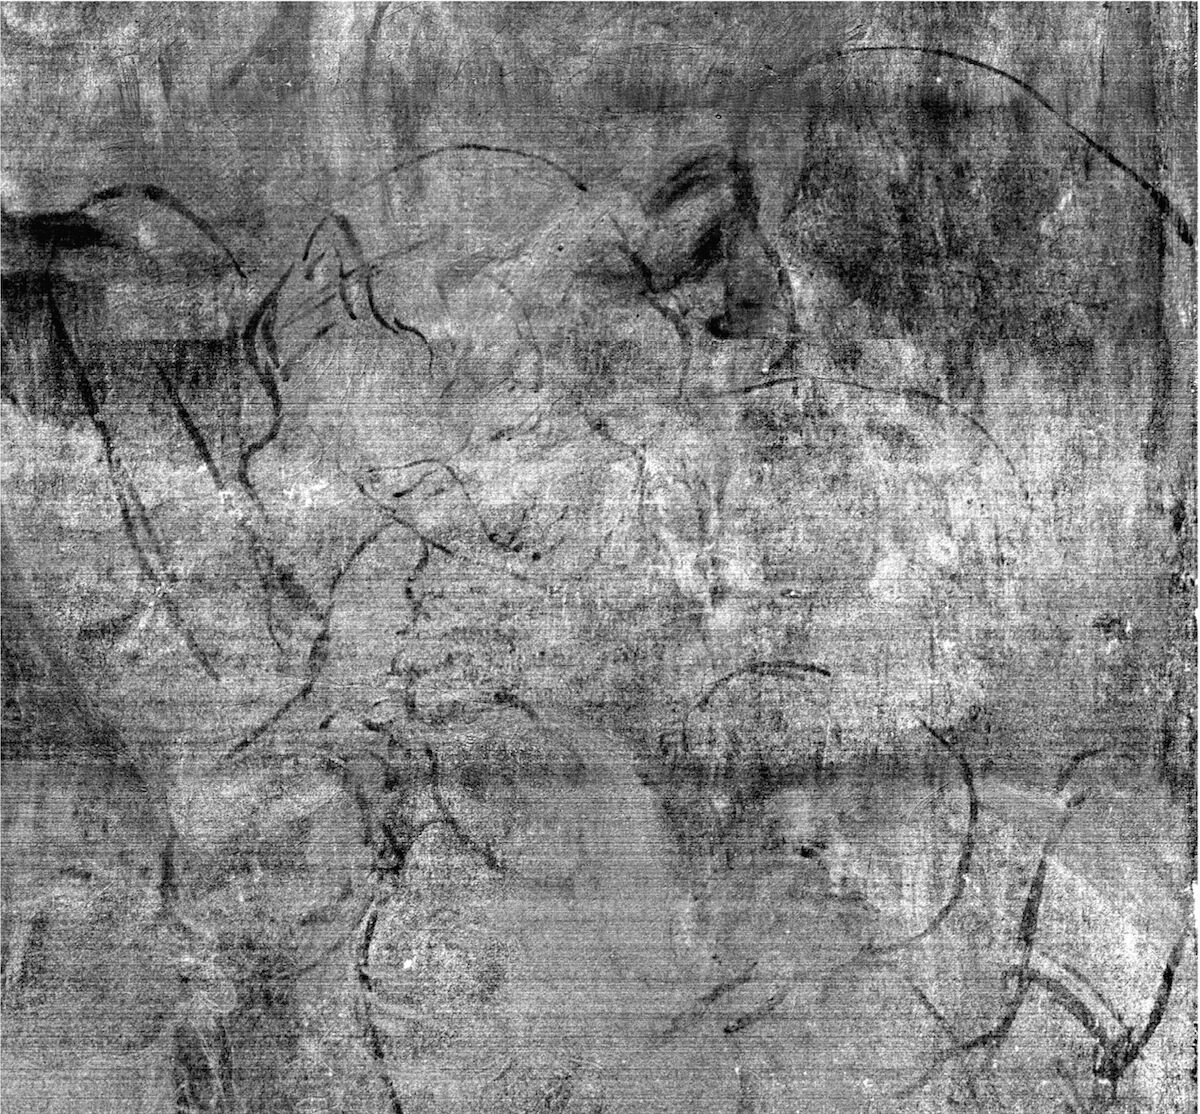 Leonardo Da Vinci S Early Drawings For The Virgin Of The Rocks Were Revealed Through X Ray Analysis